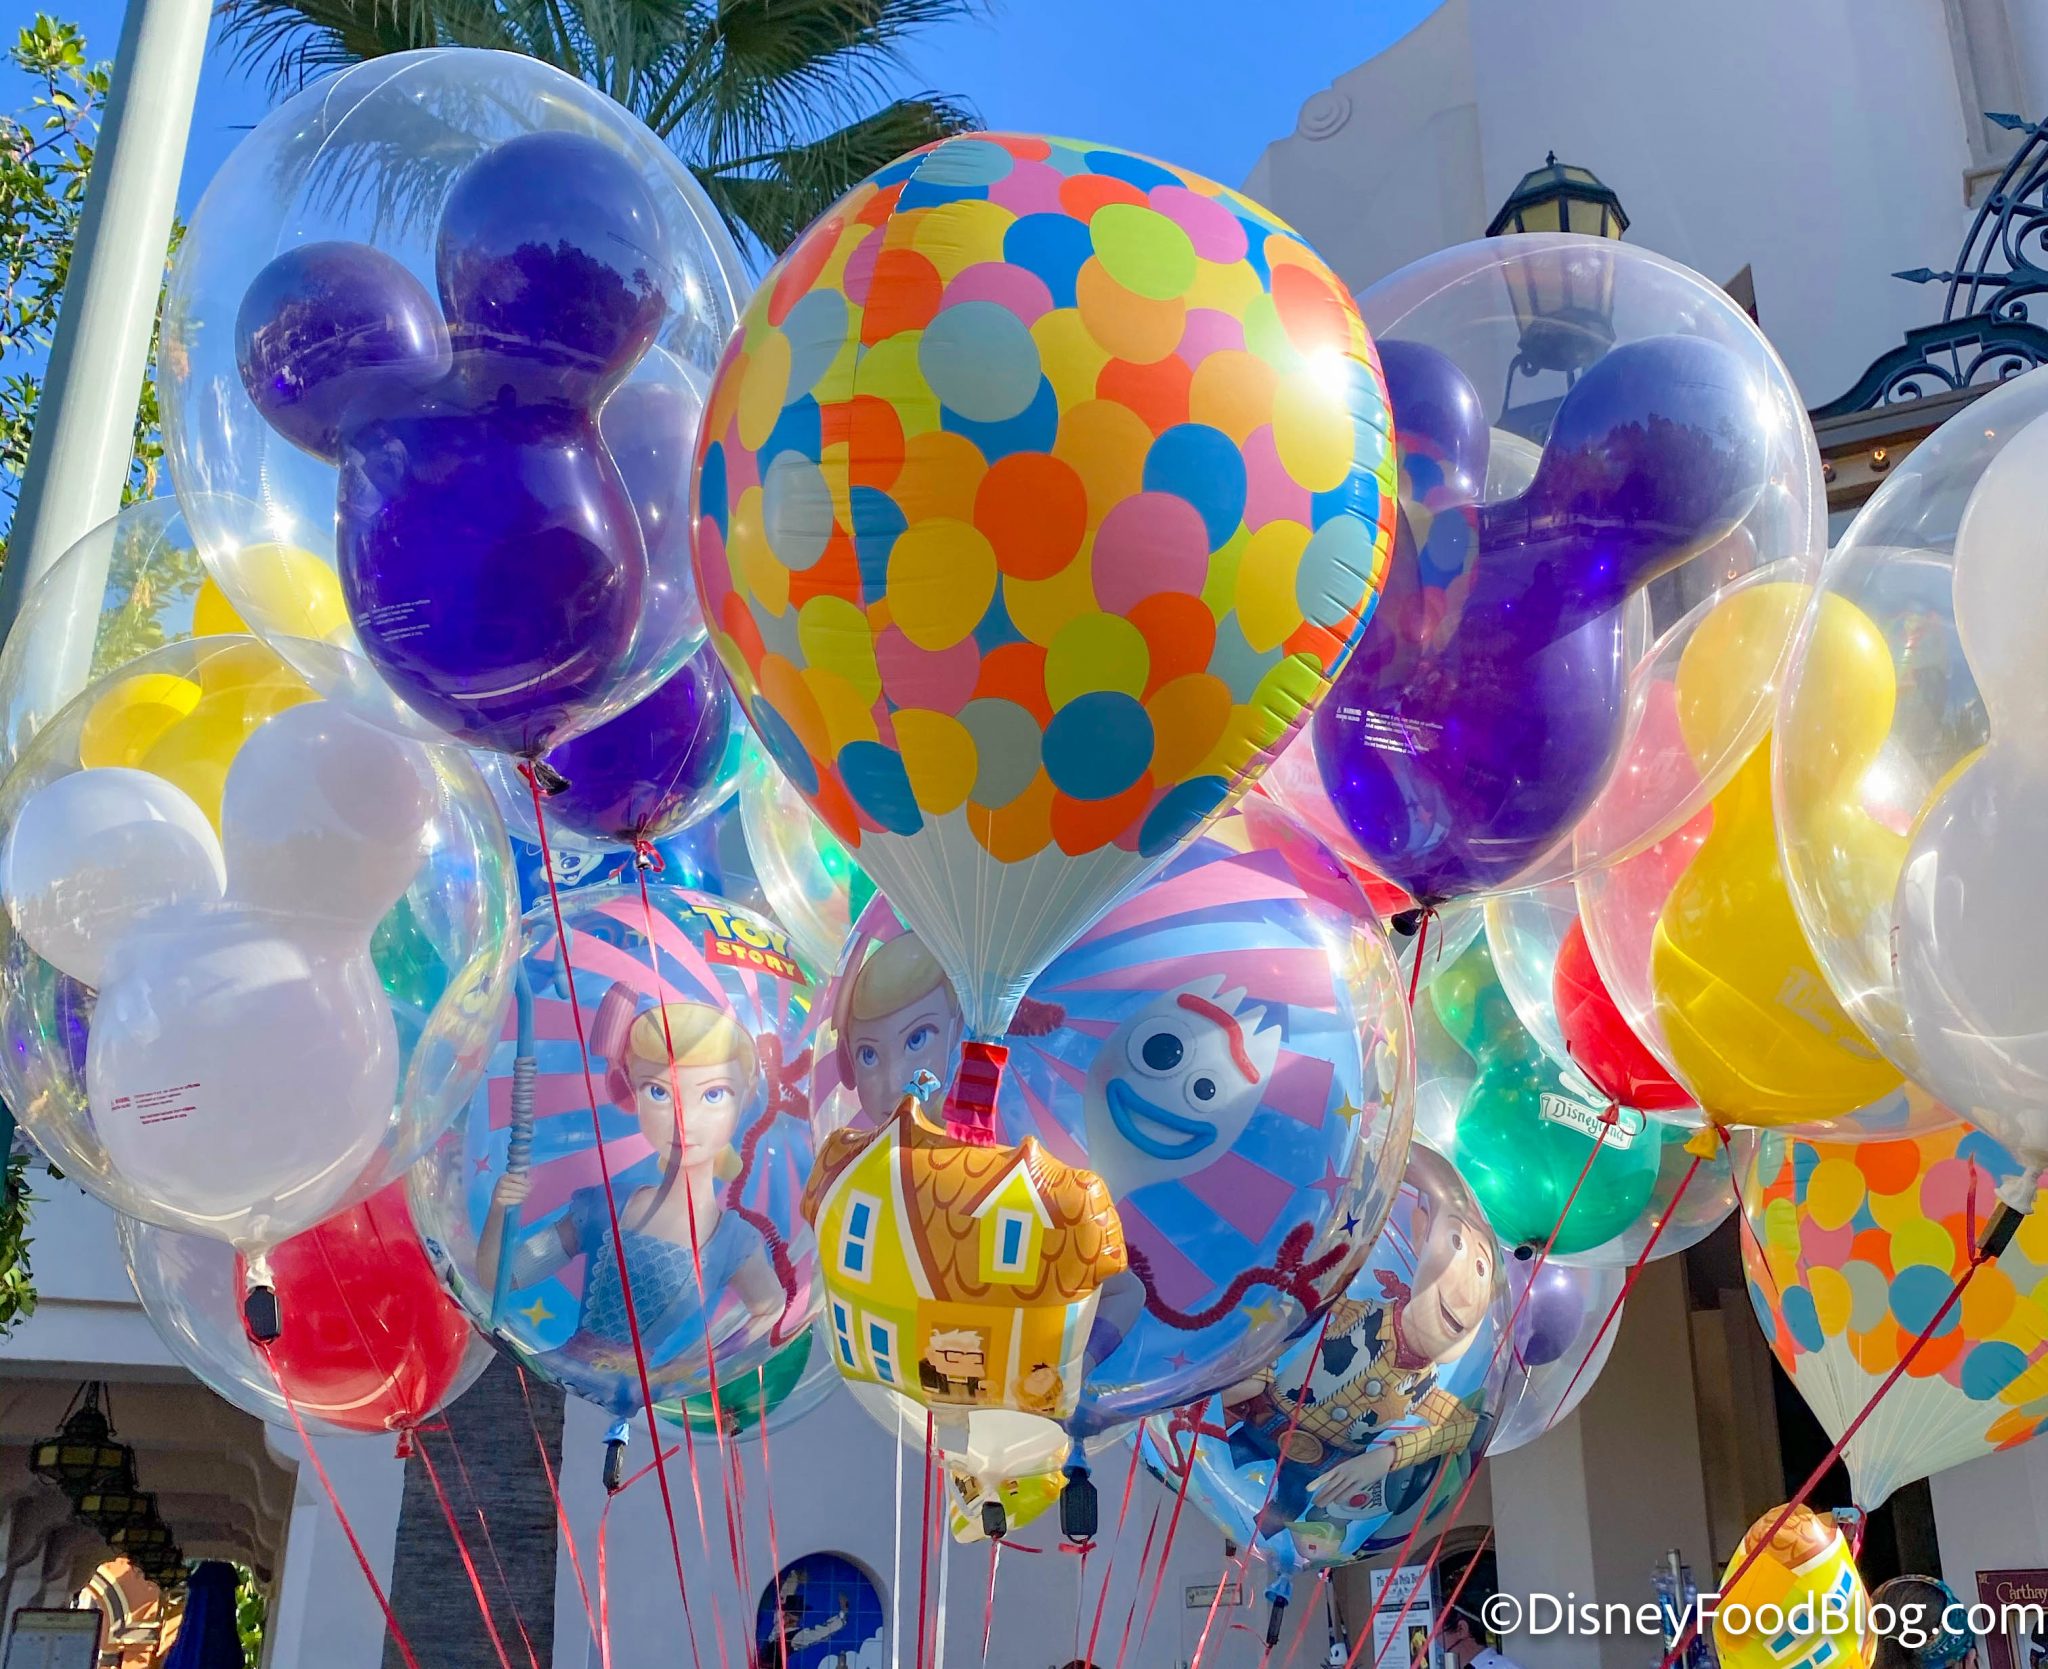 Stop Everything And Look At Disneys Insanely Cute Up Balloons With